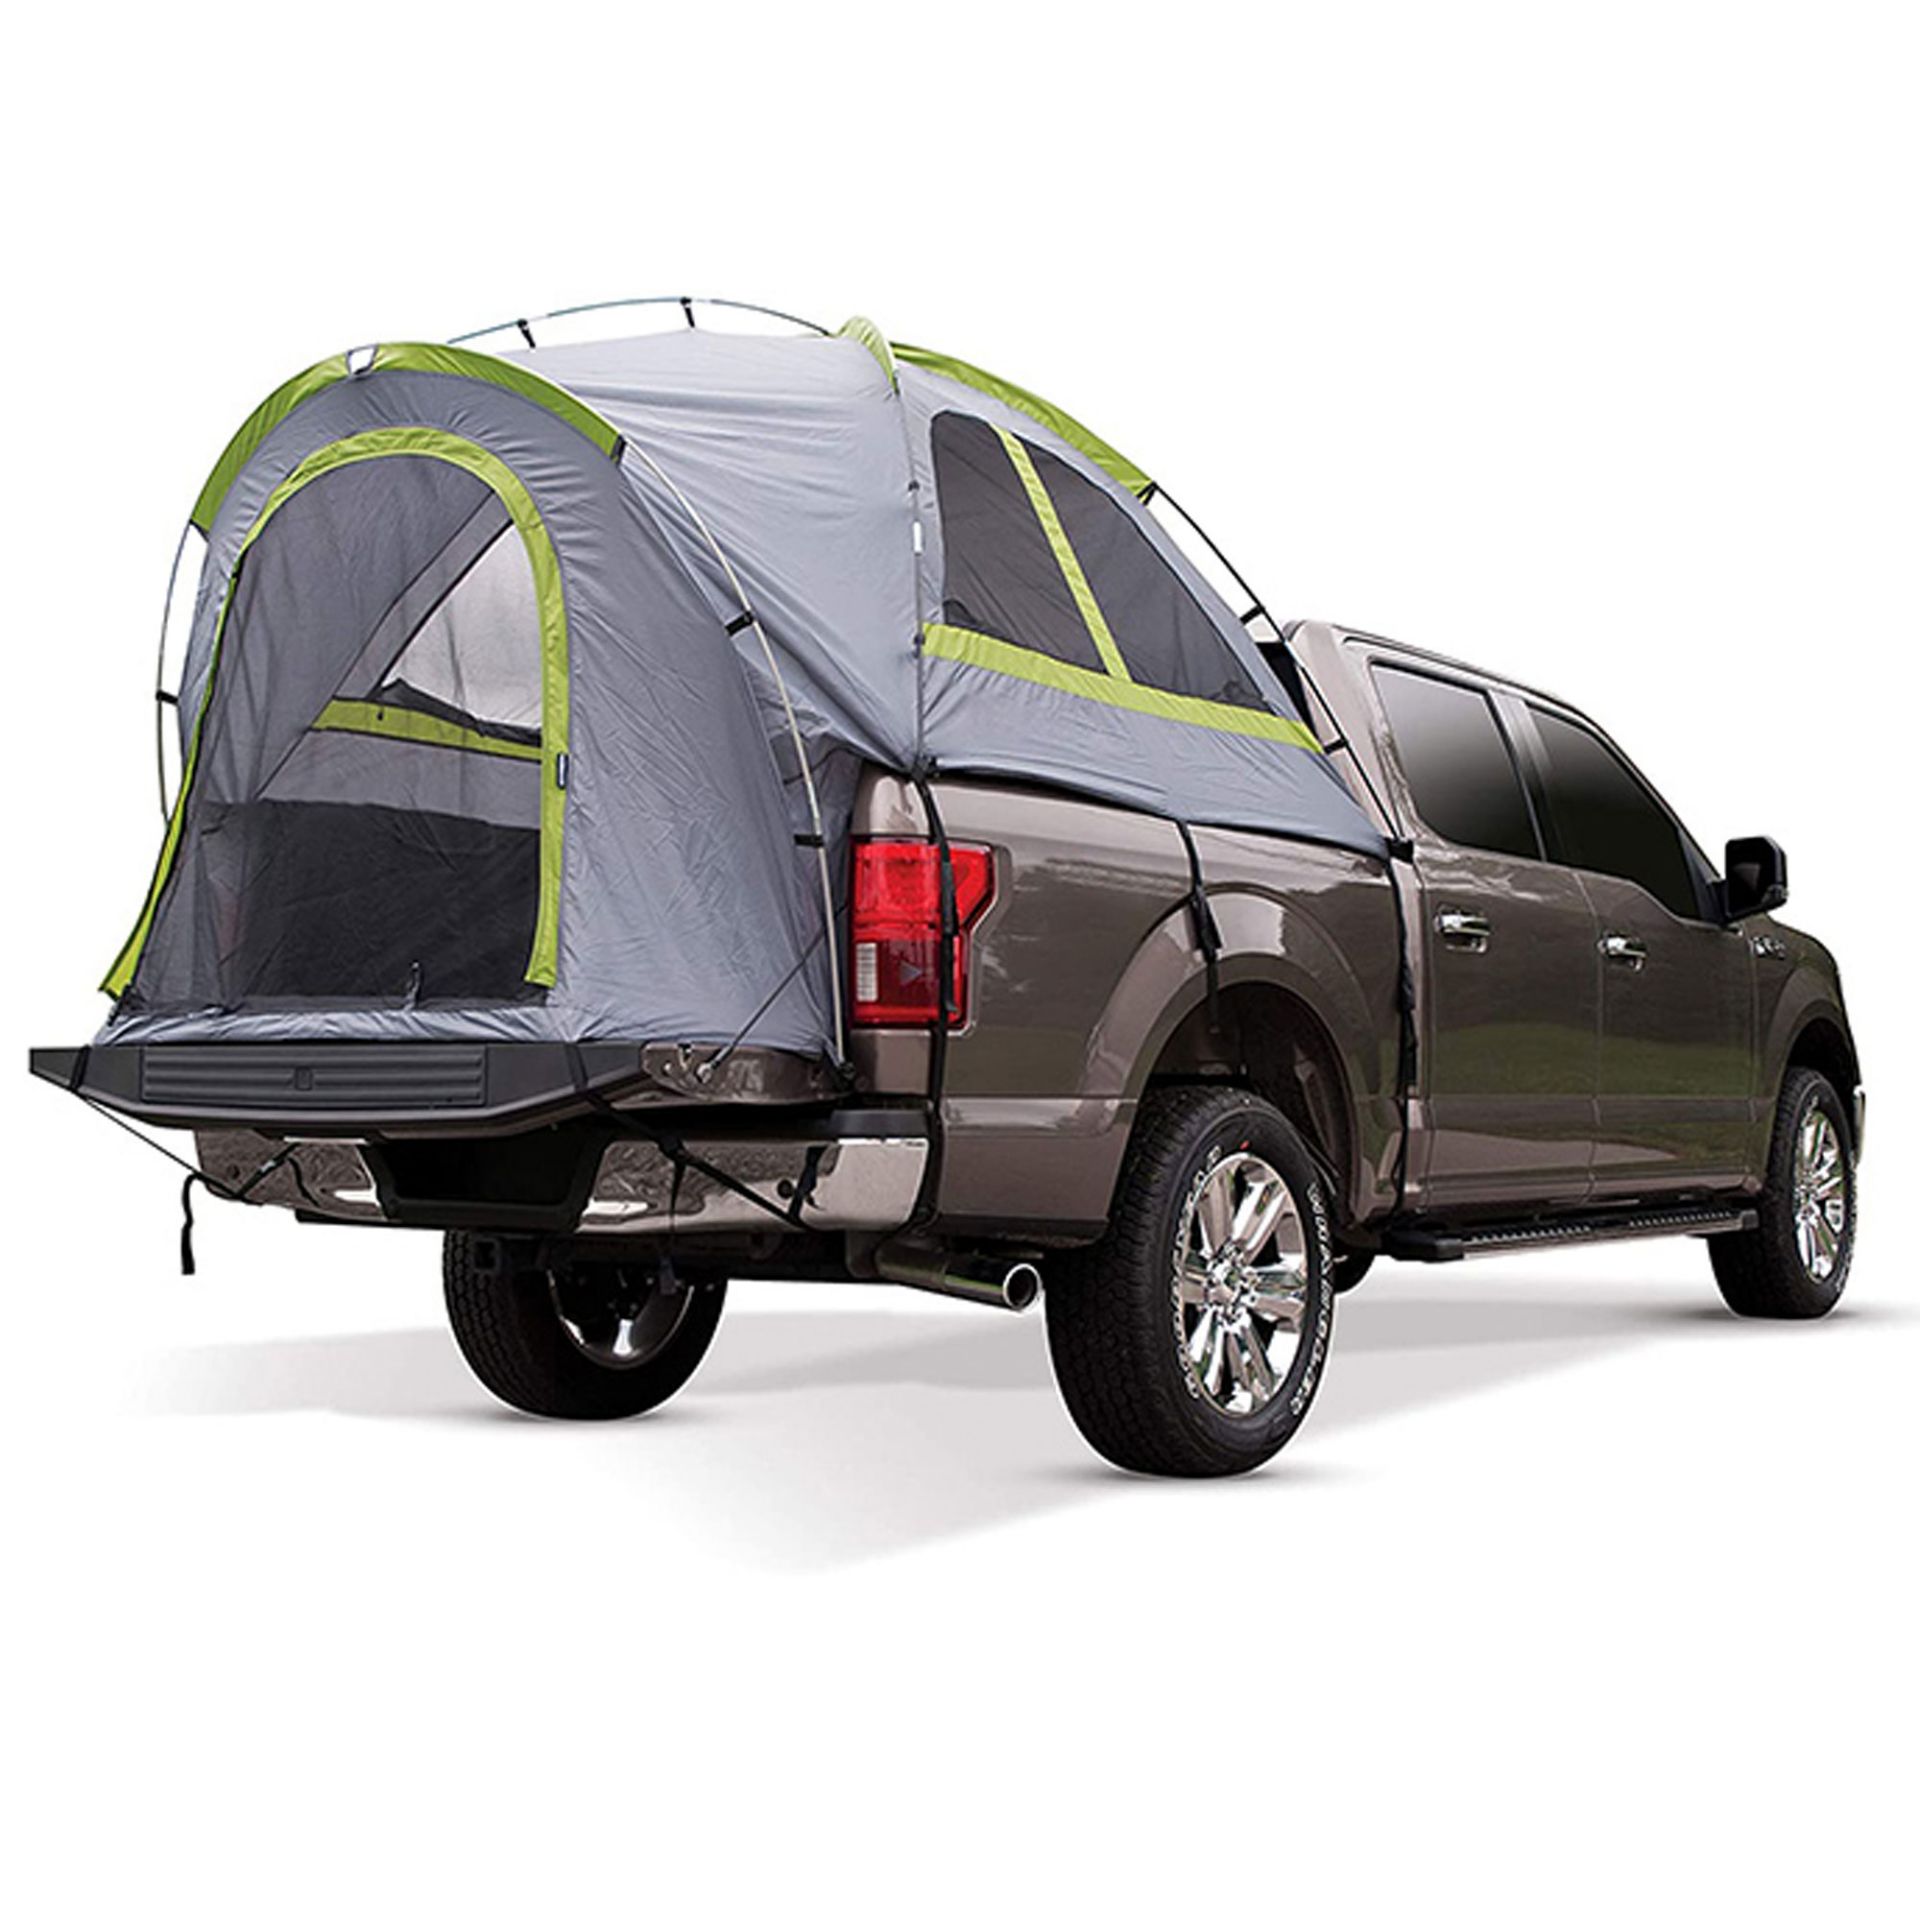 RBSM SMALL TRUCK CAMPING TENT W/ RAINFLY (NEW) (MSRP $280) - Image 3 of 6